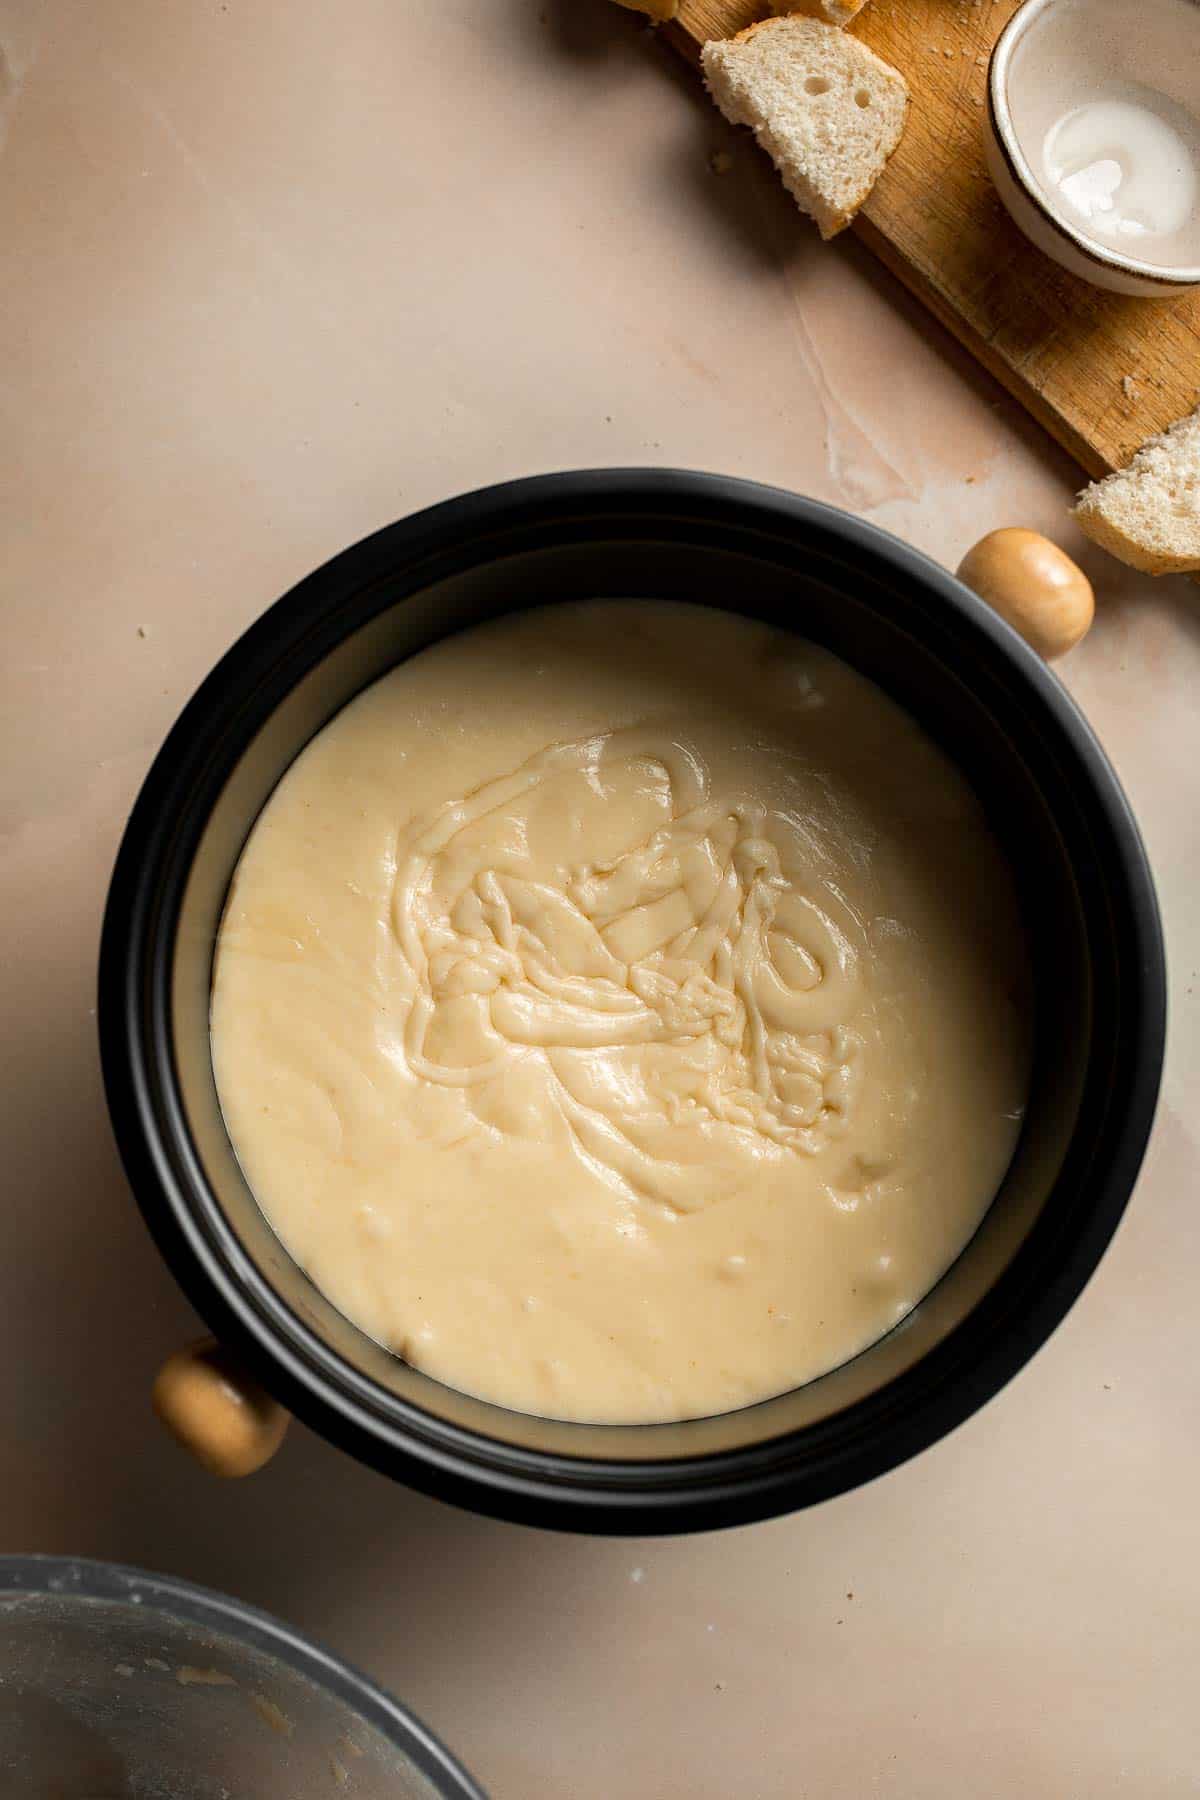 This Swiss Cheese Fondue with warm, melty cheese is a classic. Serve it as a quick and easy appetizer or dinner with bread, potatoes, and more. | aheadofthyme.com